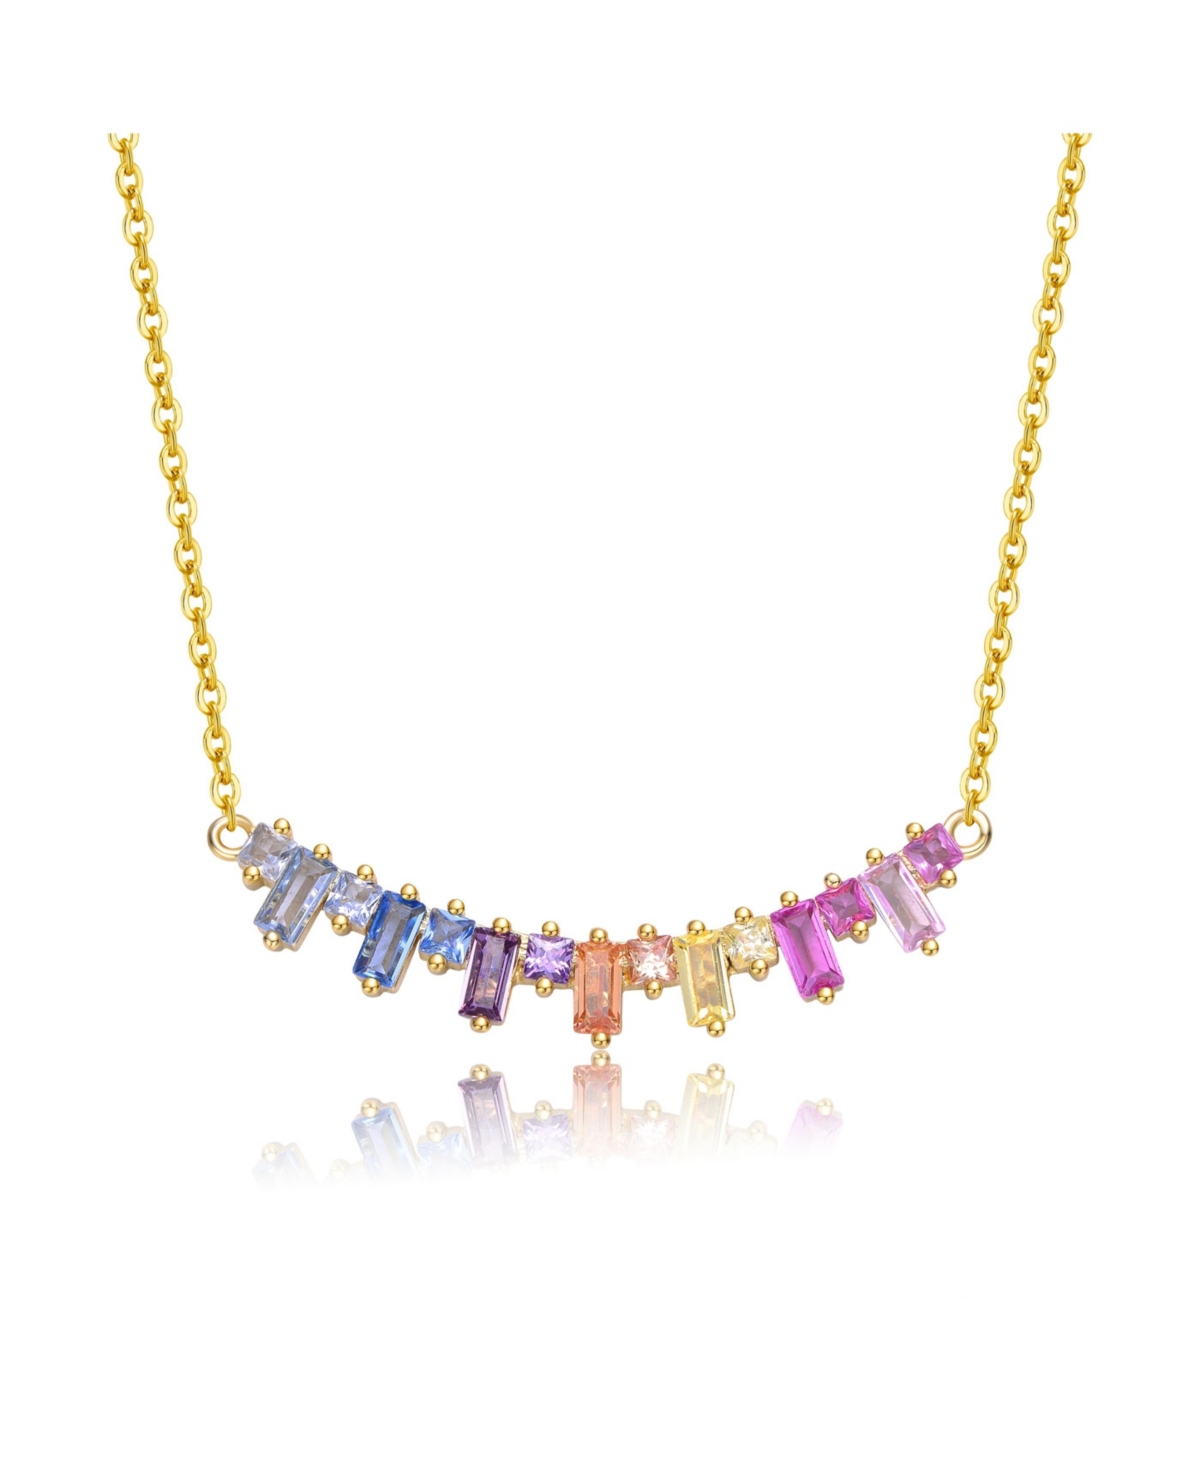 Teens/Young Adults 14k Gold Plated with Rainbow Gemstone Cubic Zirconia Linear Cluster Fringe Pendant Necklace - Gold